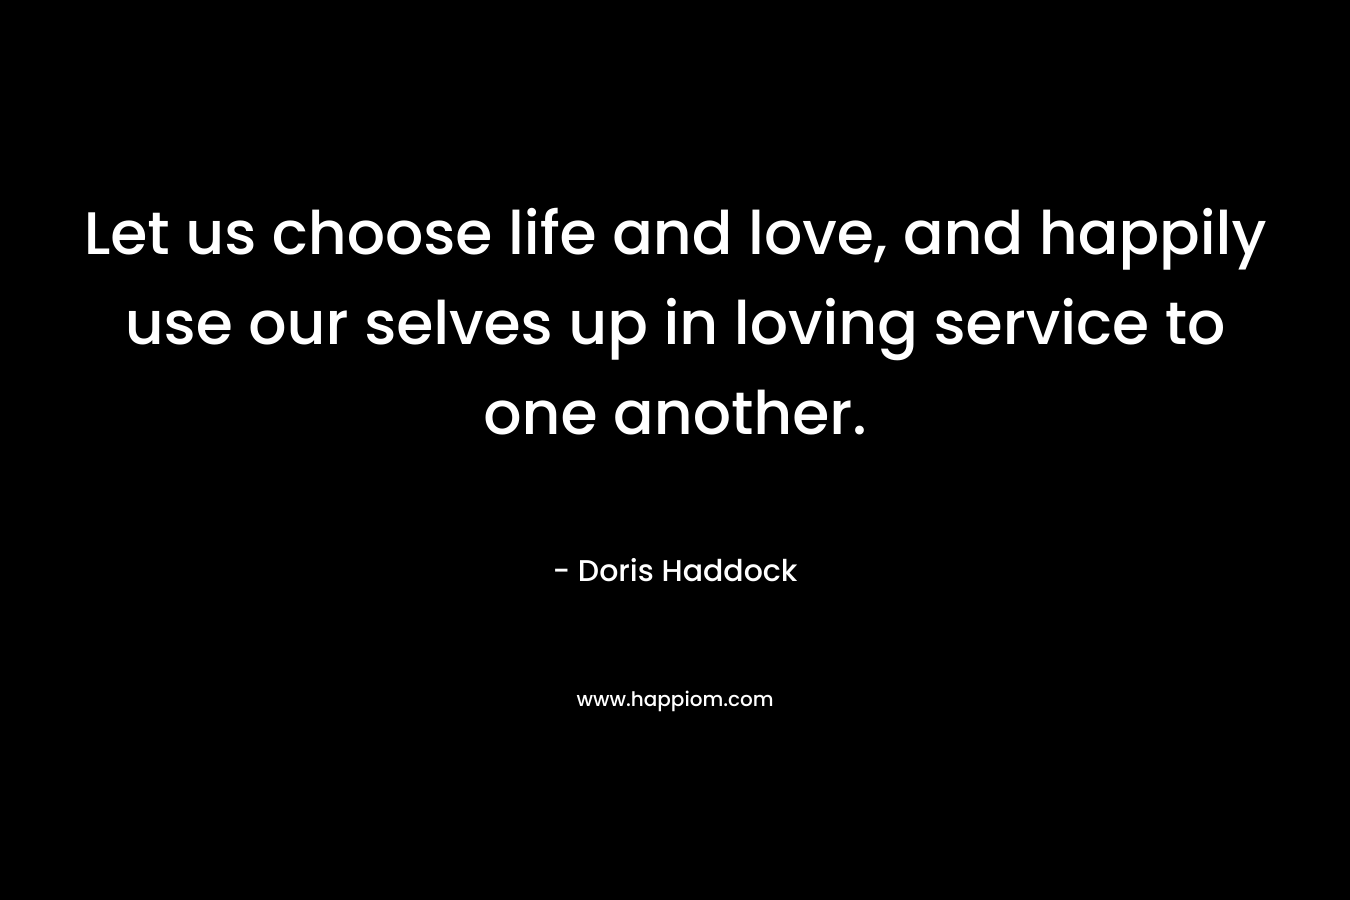 Let us choose life and love, and happily use our selves up in loving service to one another. – Doris Haddock